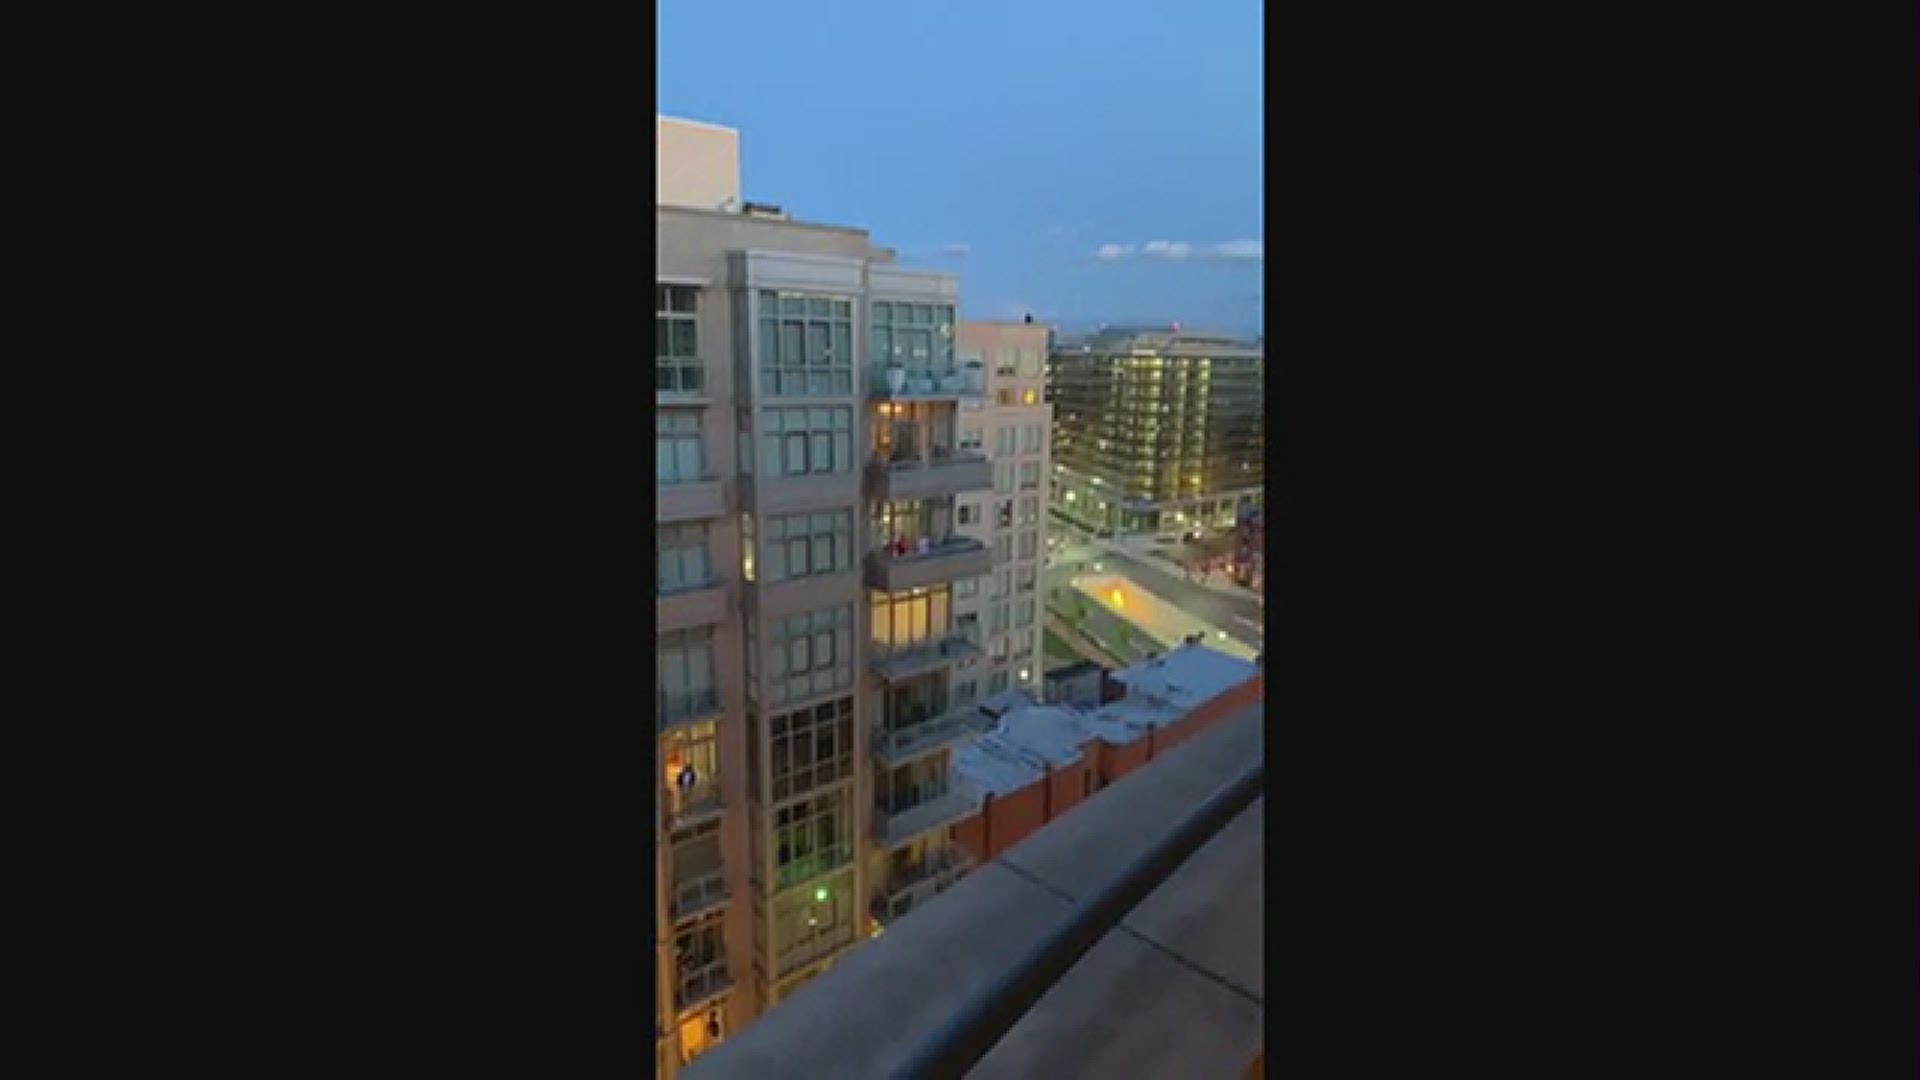 A video from Downtown D.C. shows residents in apartment high rises clapping for health care workers who are on the frontlines of the coronavirus.